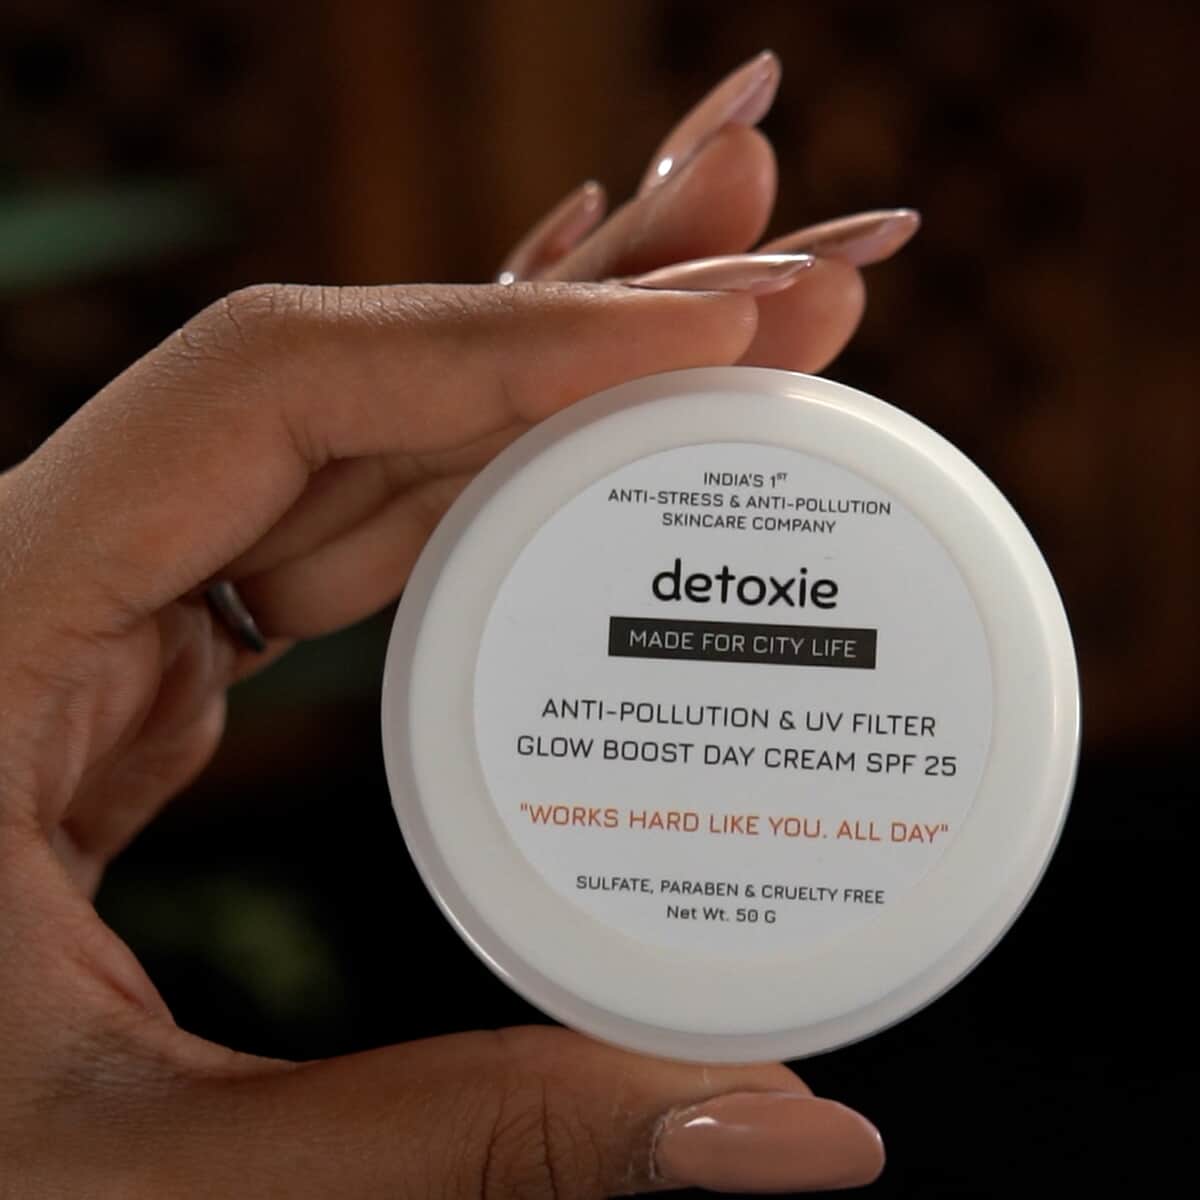 Detoxie Anti-Pollution & UV Filter, Glow Boost Day Cream SPF 25 image number 2